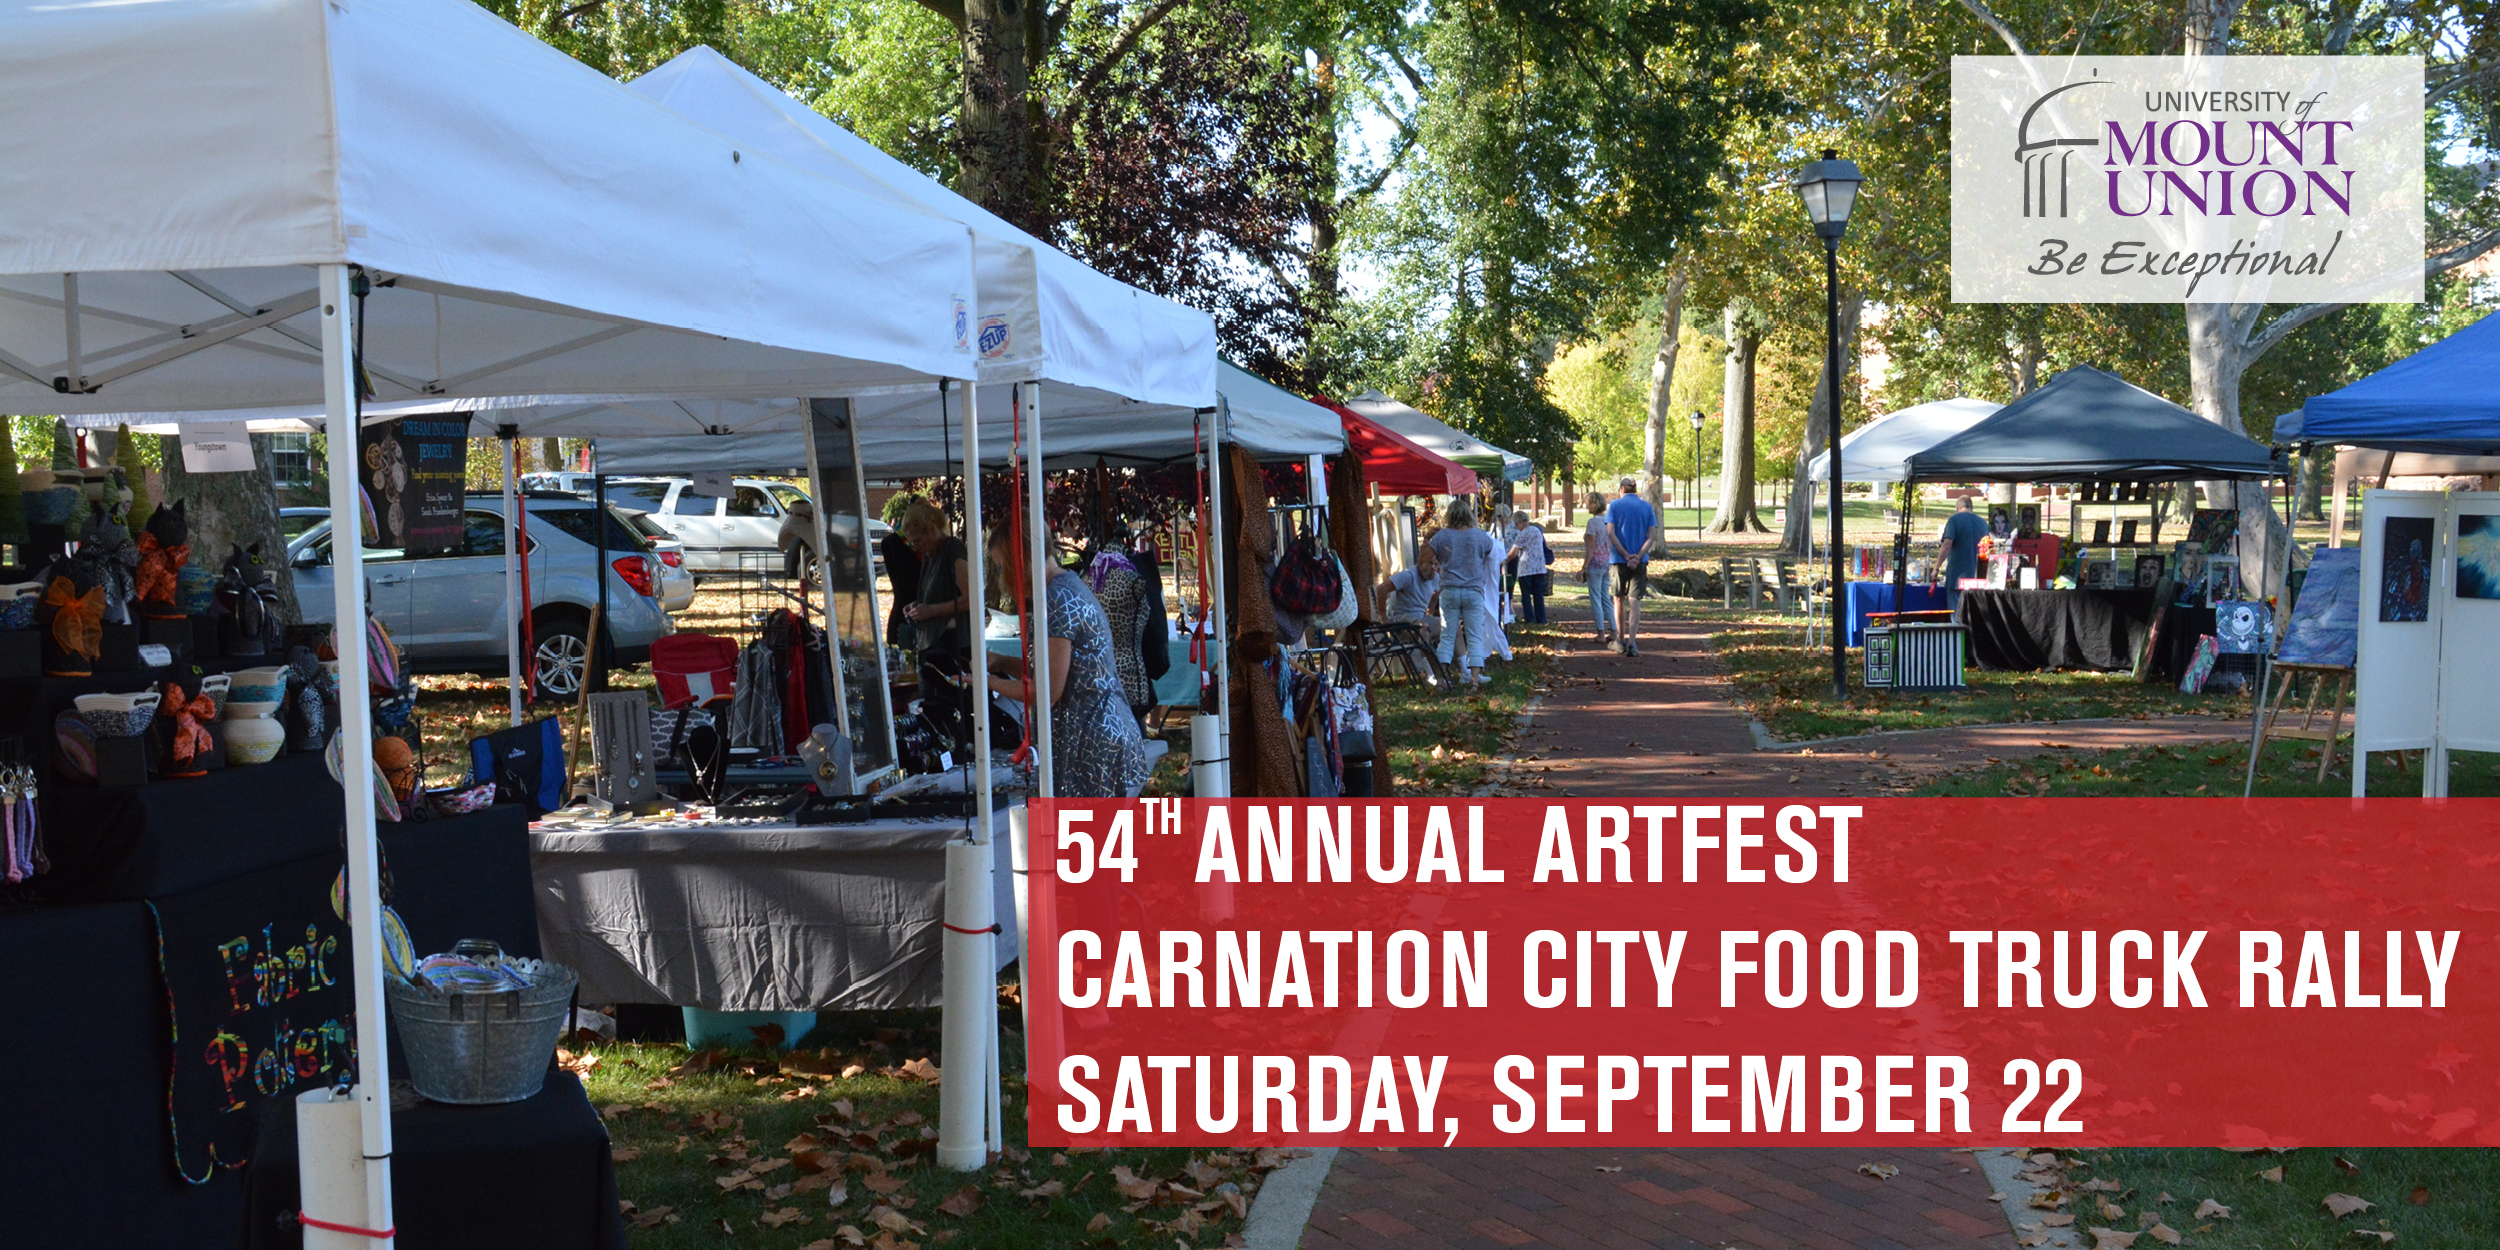 54th Annual Artfest to feature the Carnation City Food Truck Rally